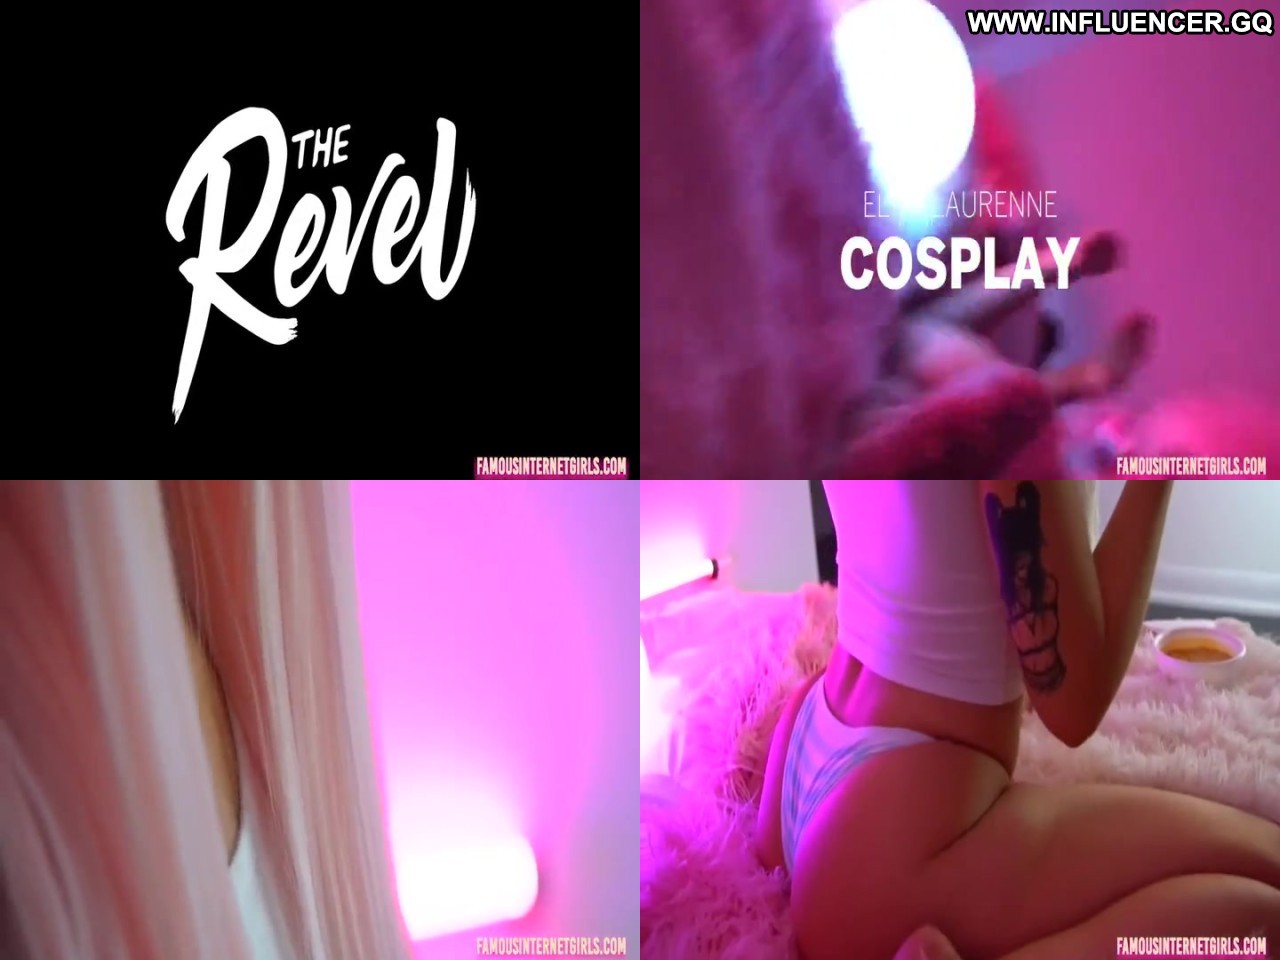 30583-elise-laurenne-hot-cosplay-straight-hot-video-full-hot-hot-cosplay-hot